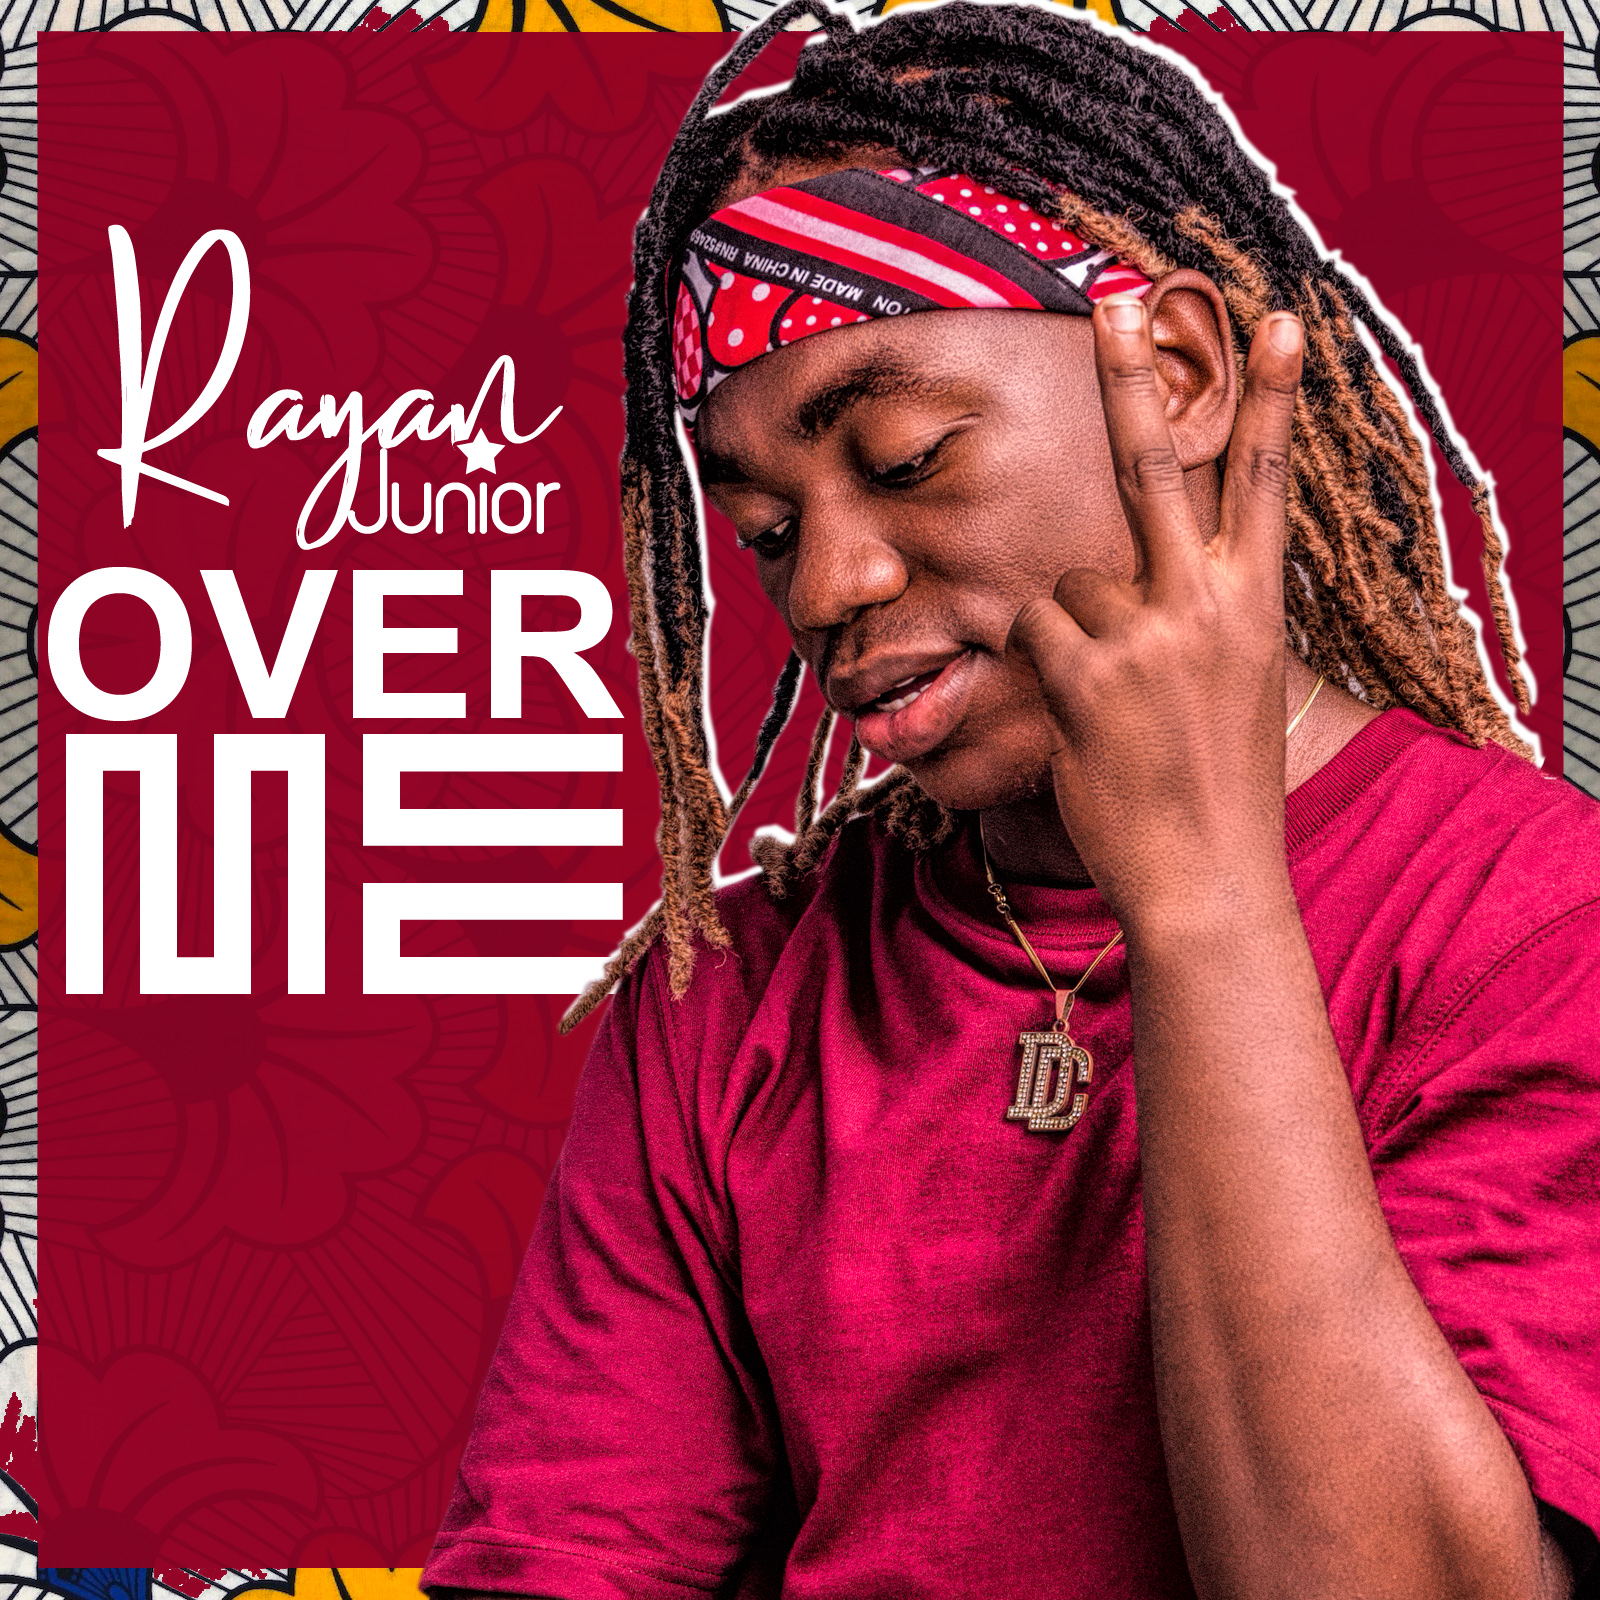 Rayan Junior - Over me